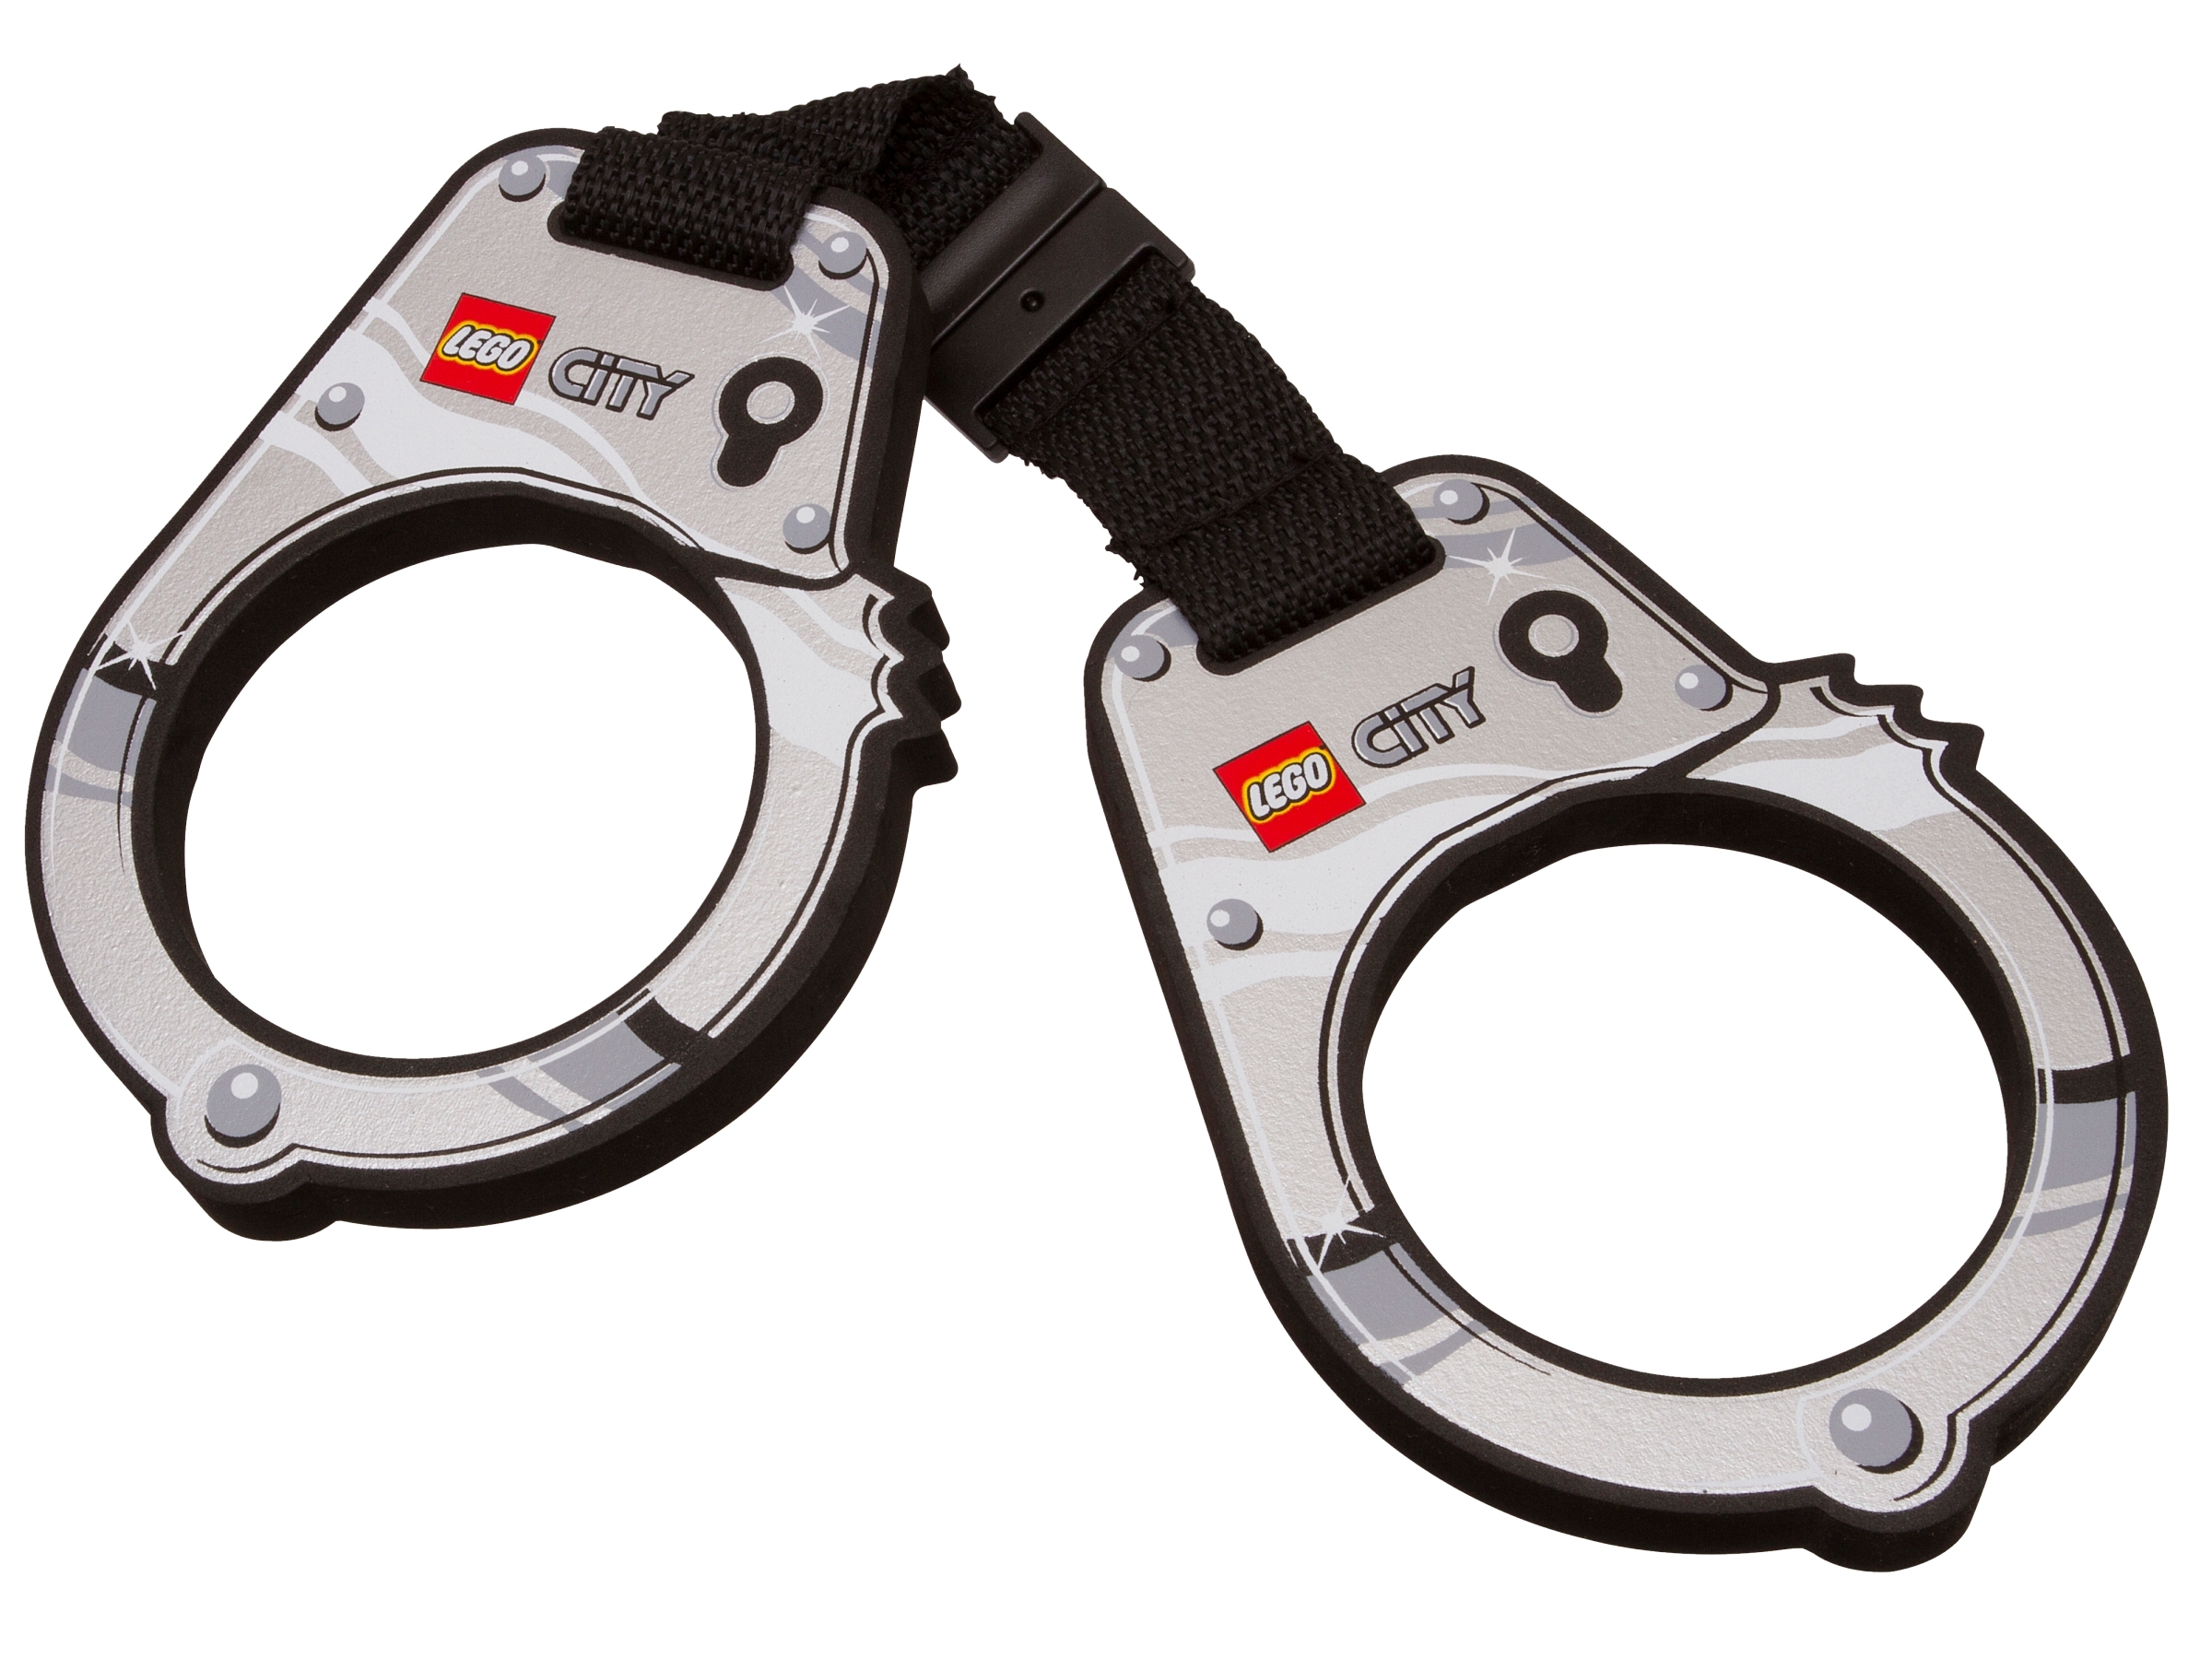 Detail Images Of Handcuffs Nomer 21